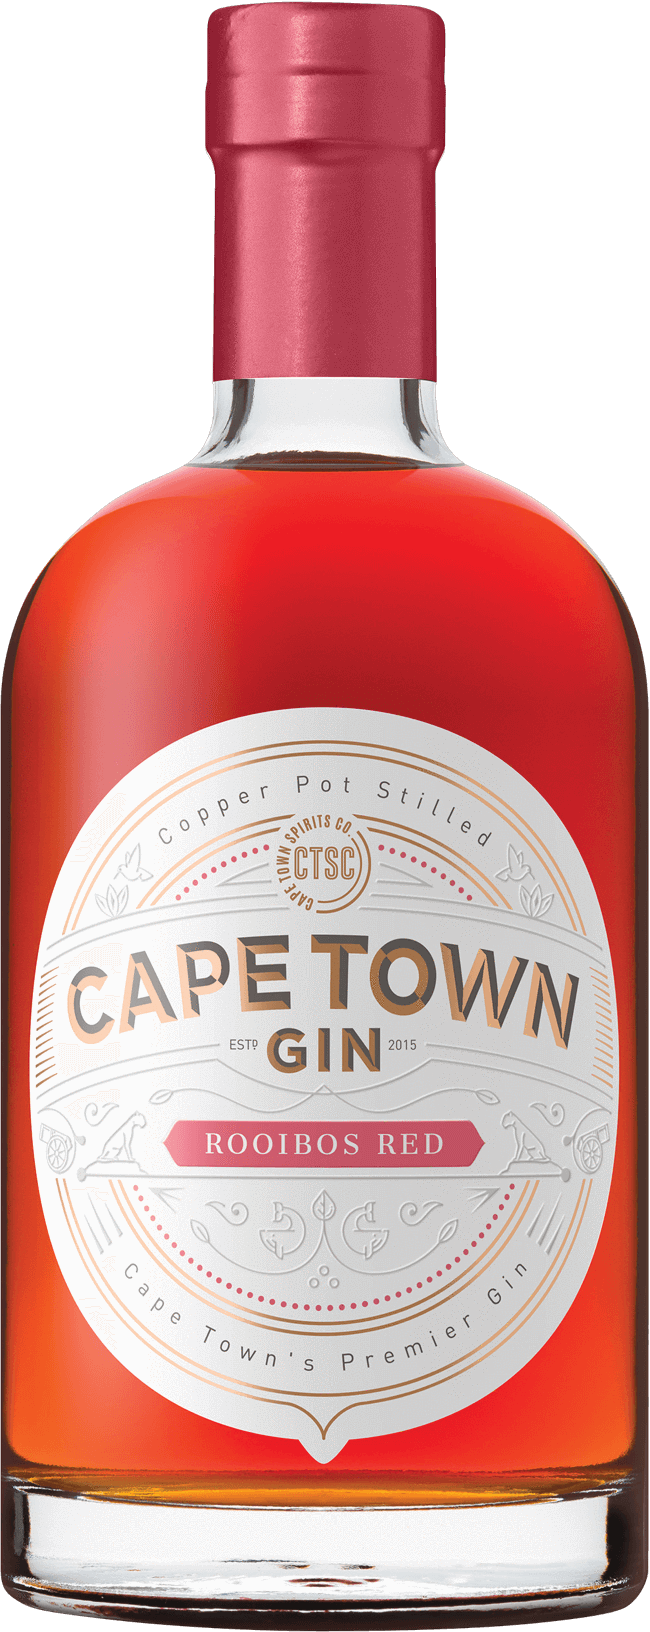 Cape Town Rooibos Red Gin Bottle PNG image